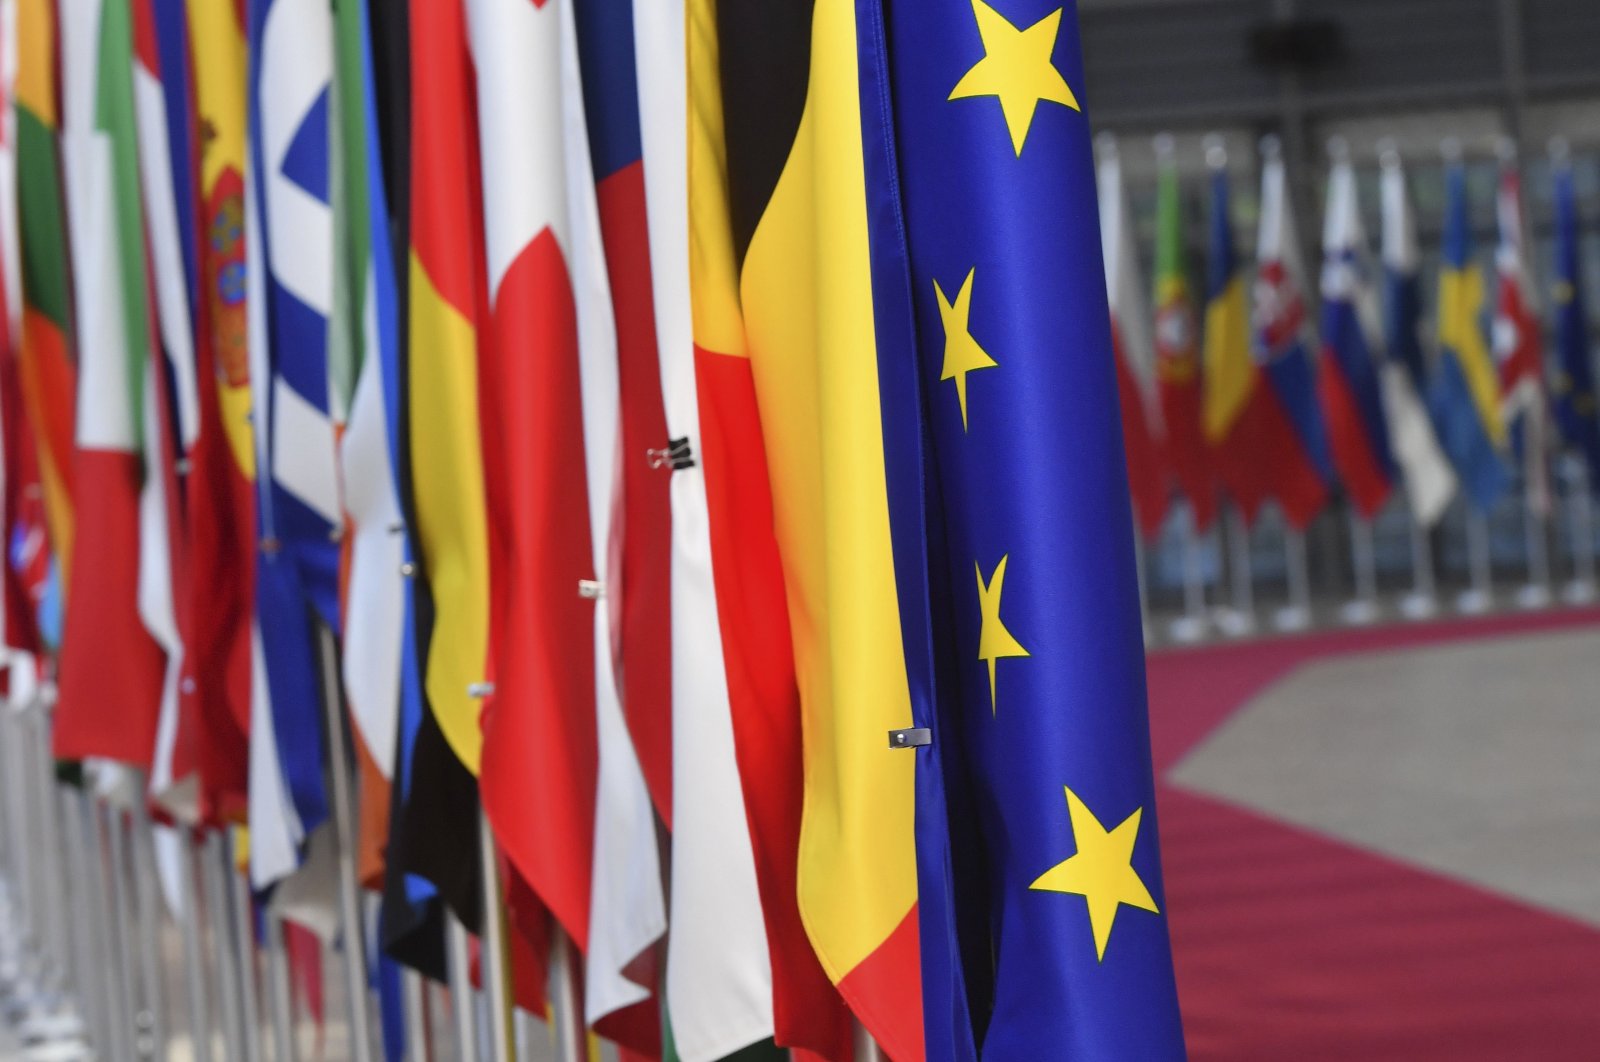 The European Union flag is displayed with EU member countries' flags at the European Council in Brussels, May 13, 2019. (AFP Photo)